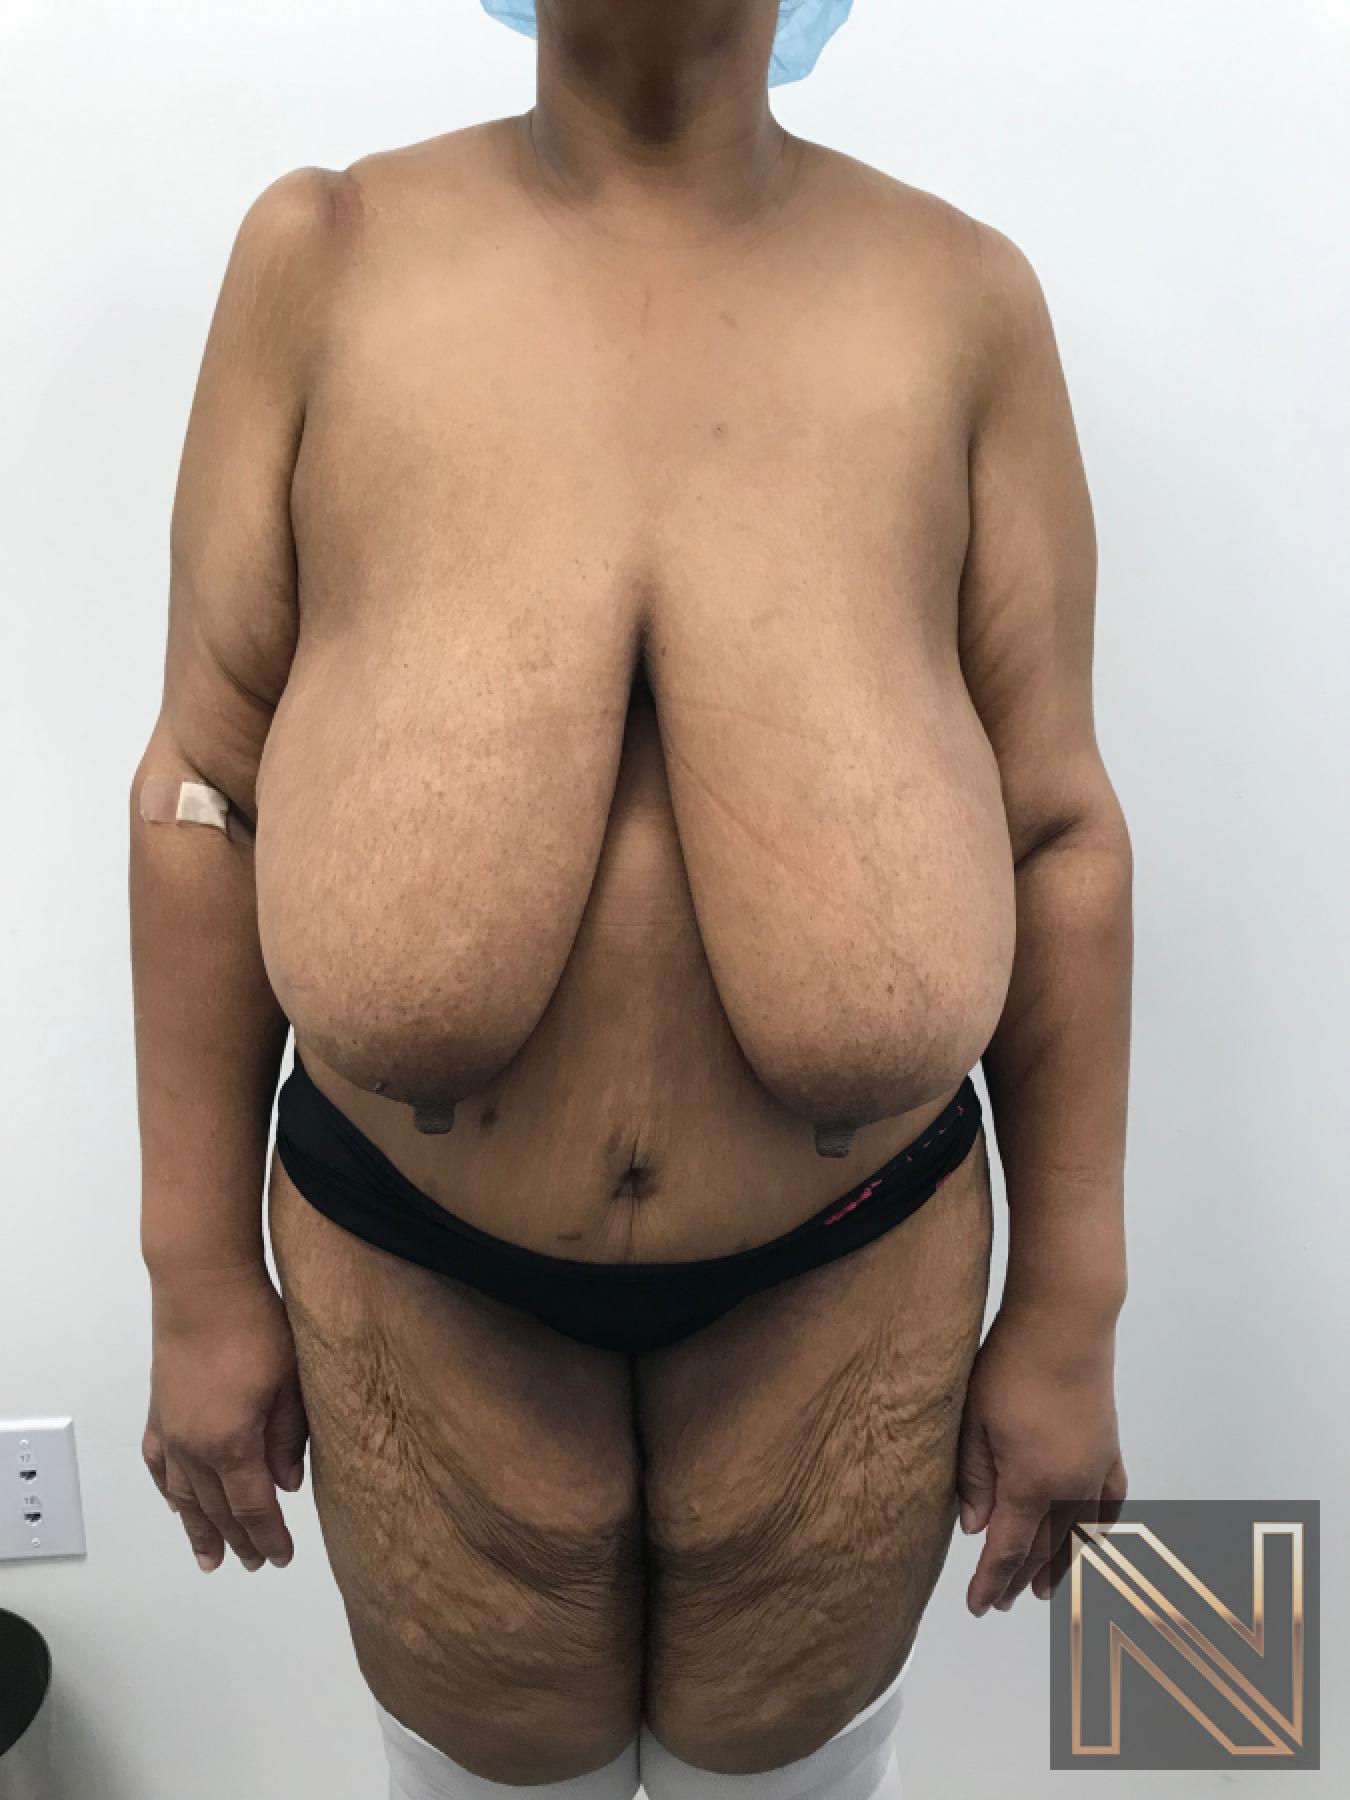 Breast Reduction: Patient 2 - Before 1